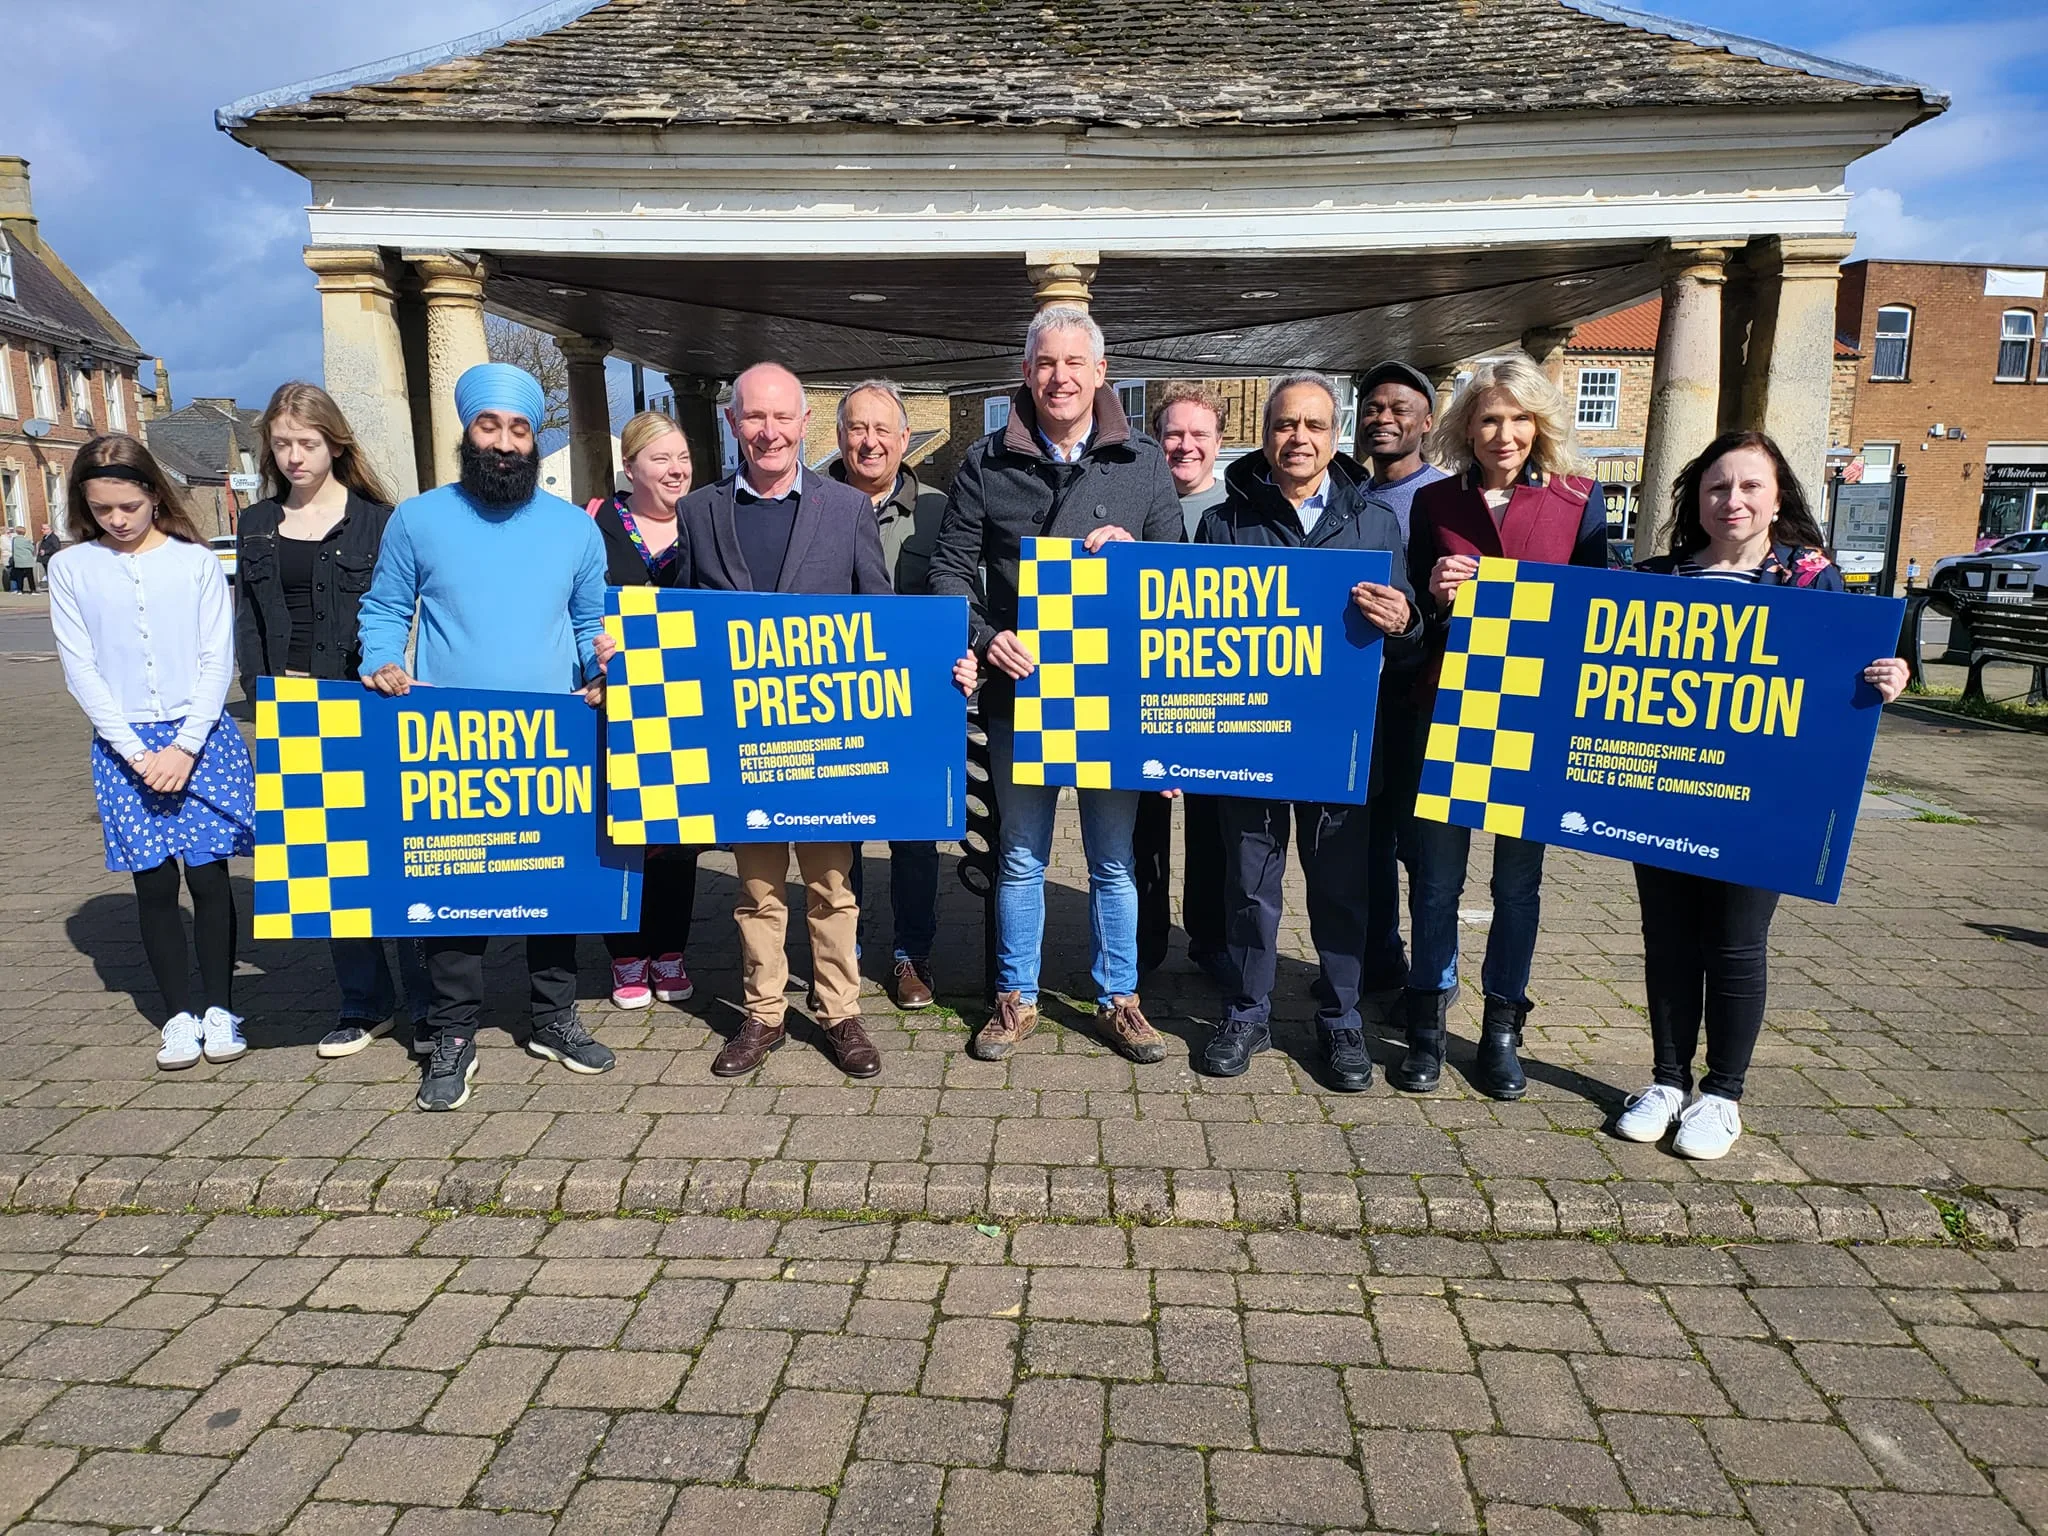 MP Steve Barclay visits Whittlesey to promote election prospects for police and crime commissioner Darryl Preston and a local Conservative by election candidate. Videos made by Mr Barclay were ordered to be removed from a town council Facebook page